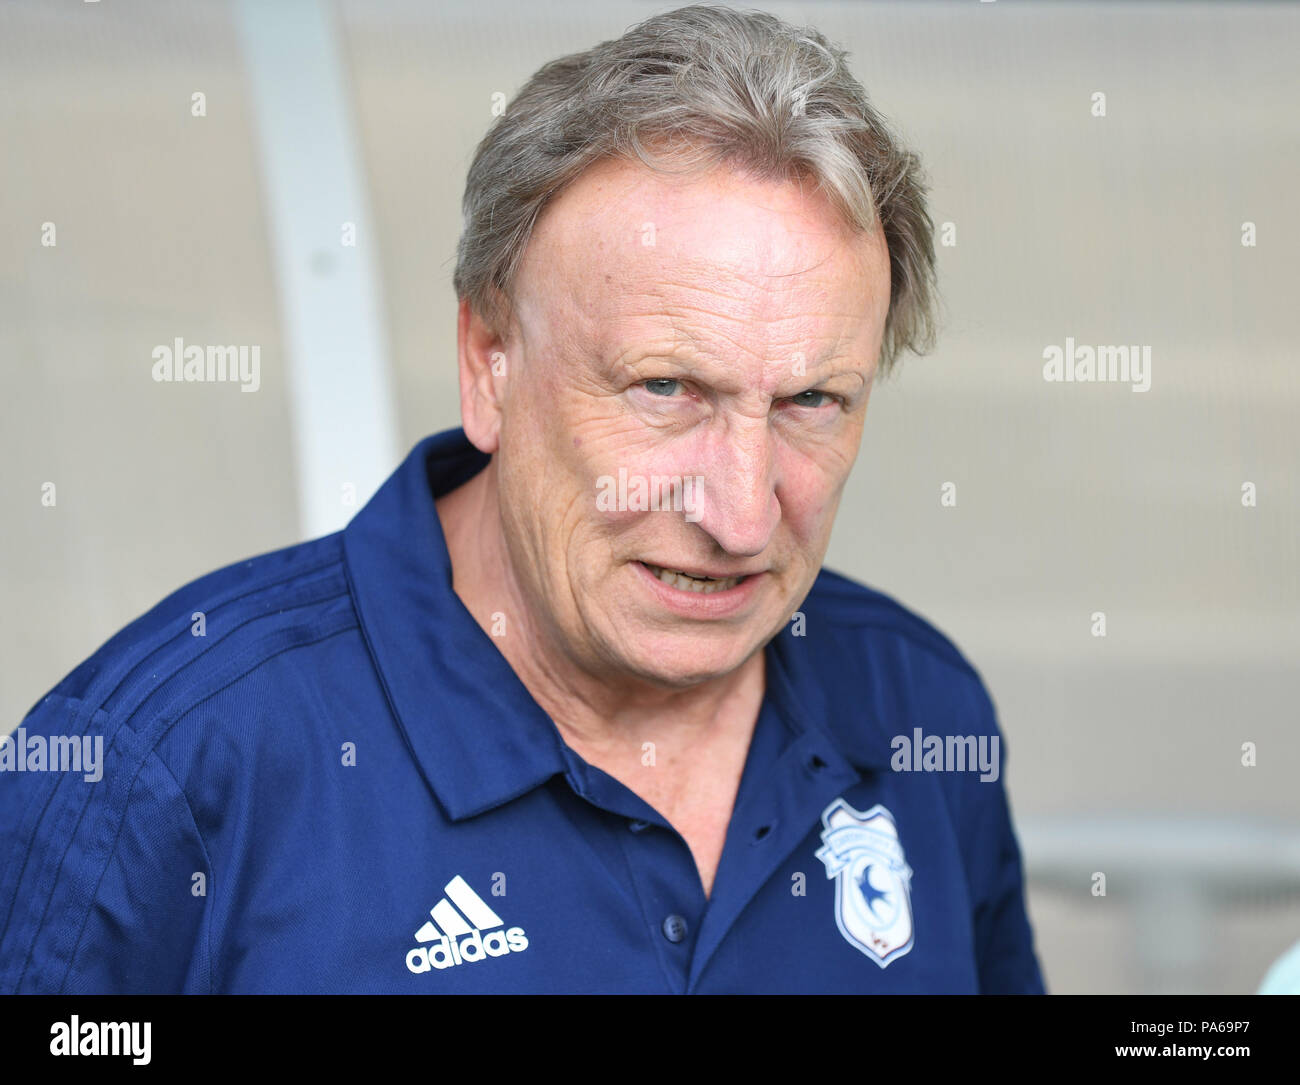 Cardiff City manager Neil Warnock prior to a pre season friendly match at Plainmoor. Torquay. Stock Photo